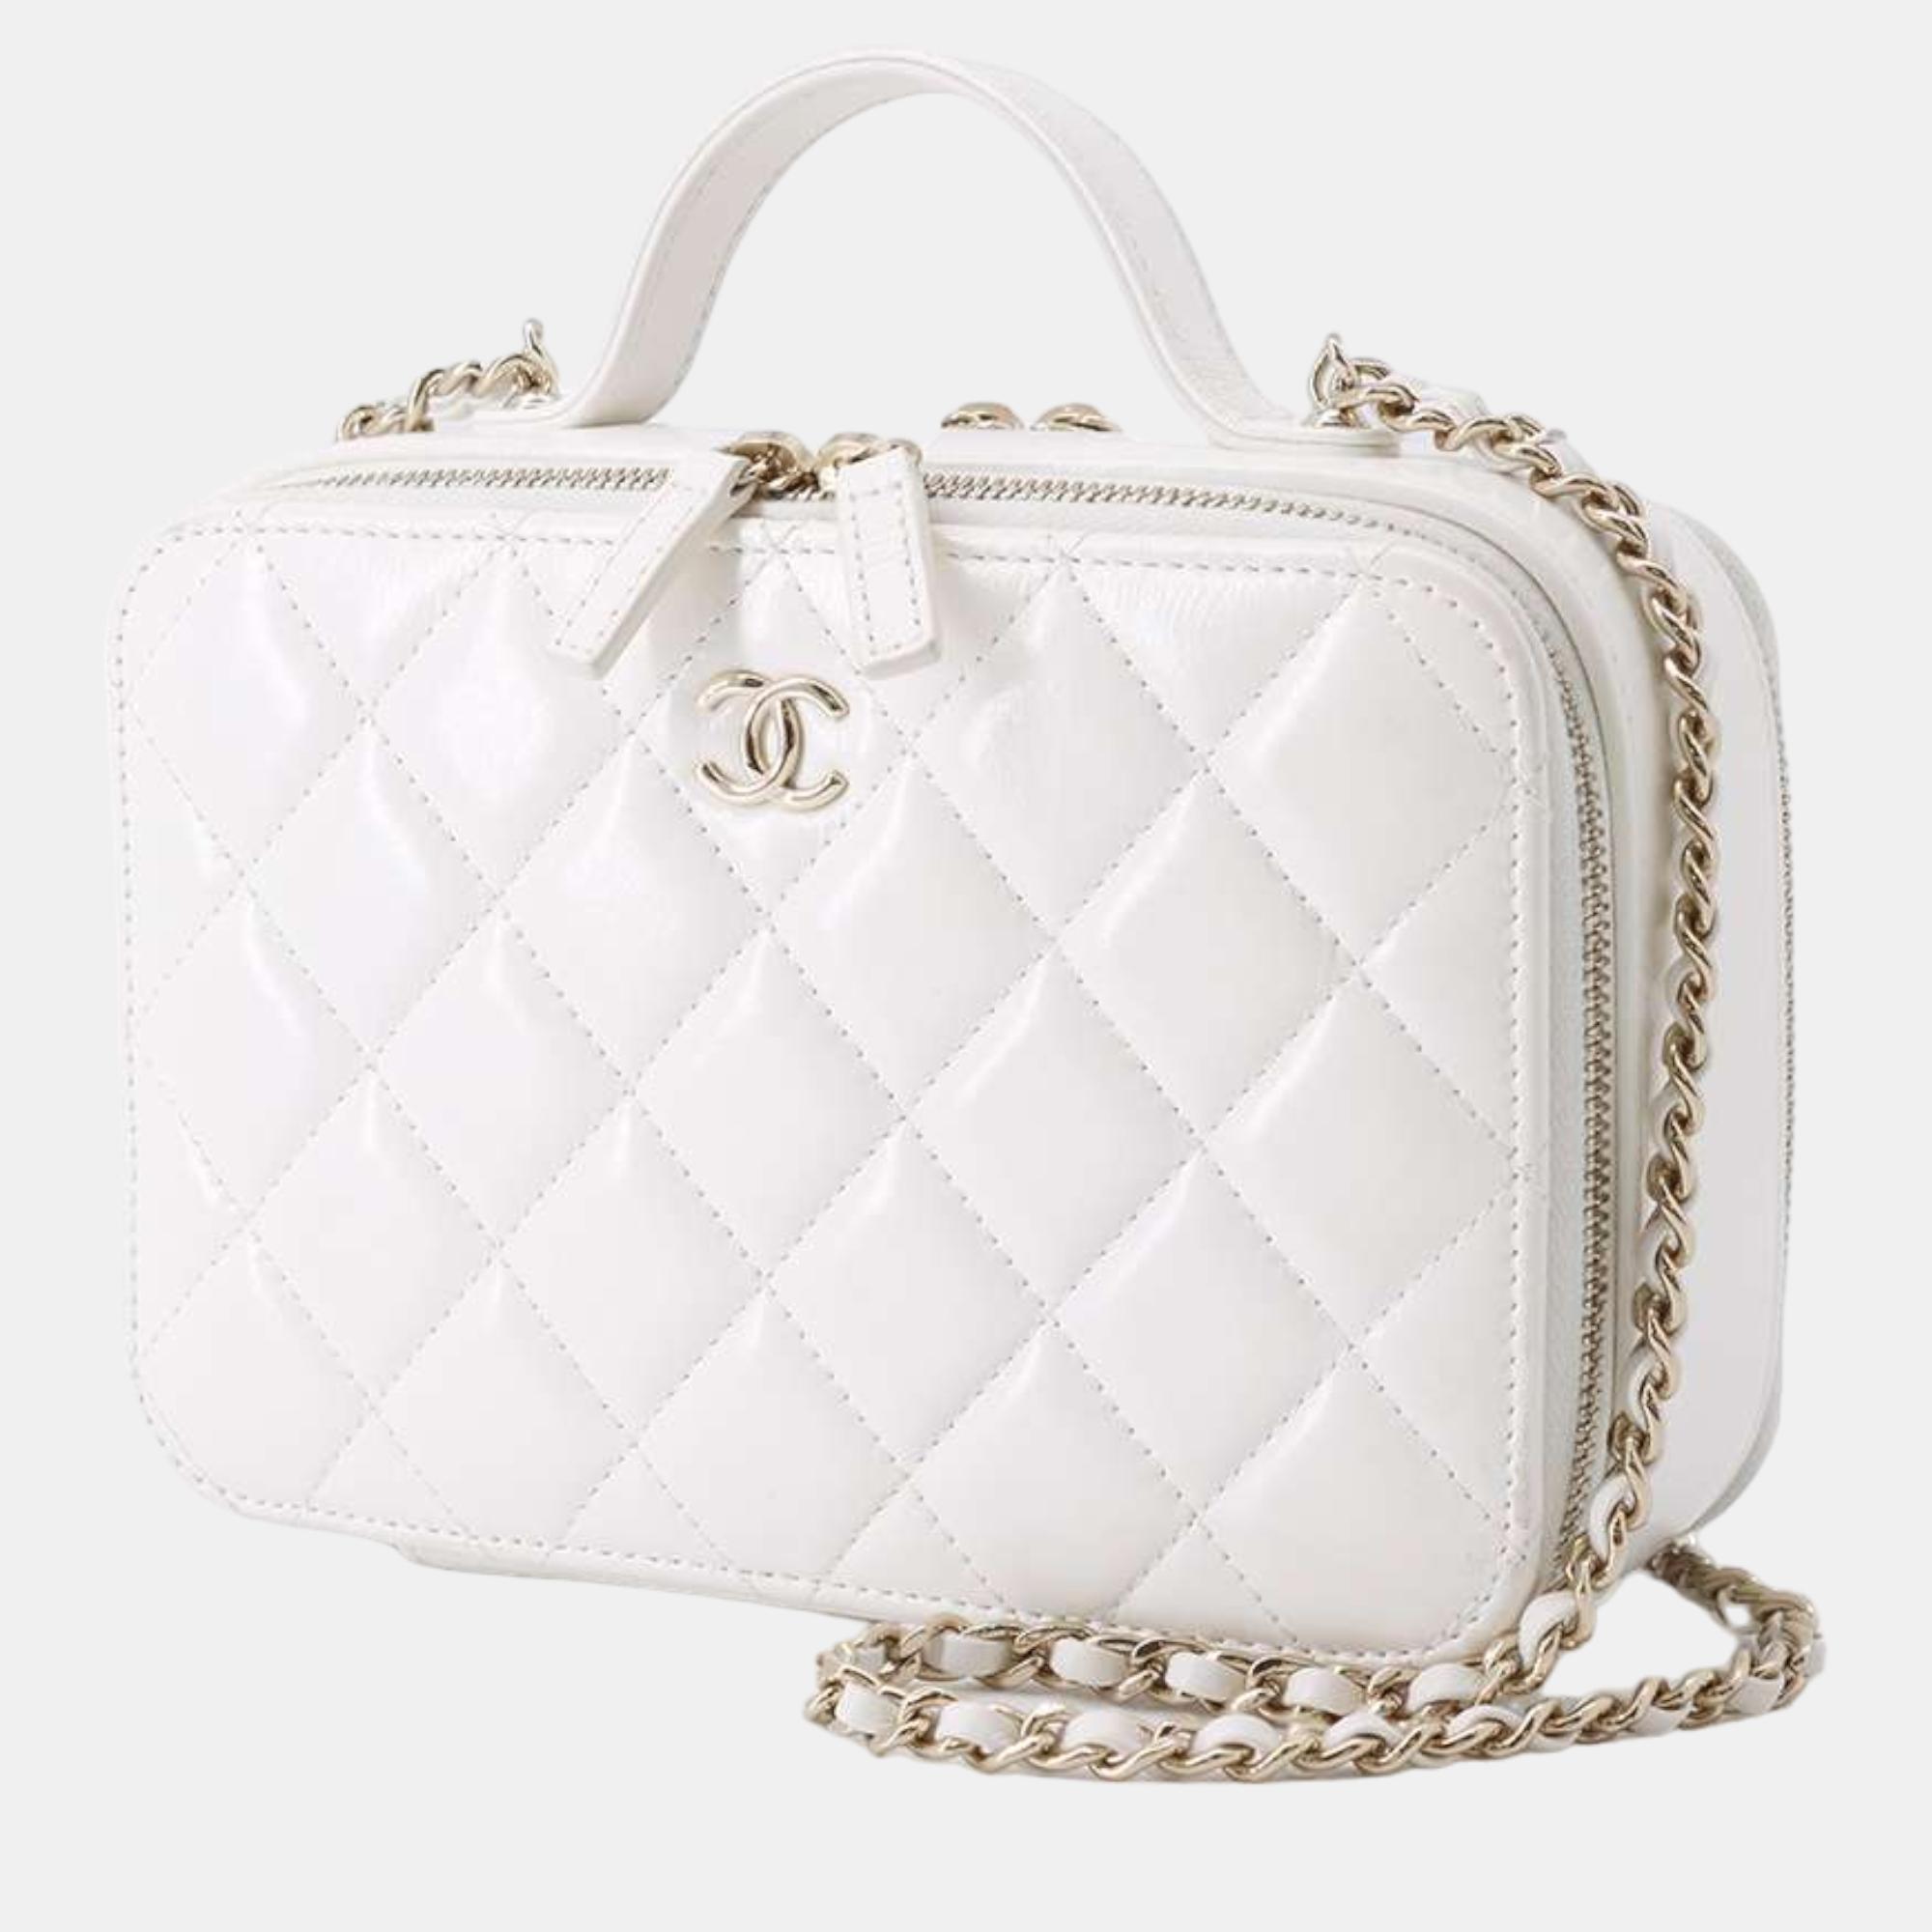 Pre-owned Chanel White Leather Cc Vanity Case